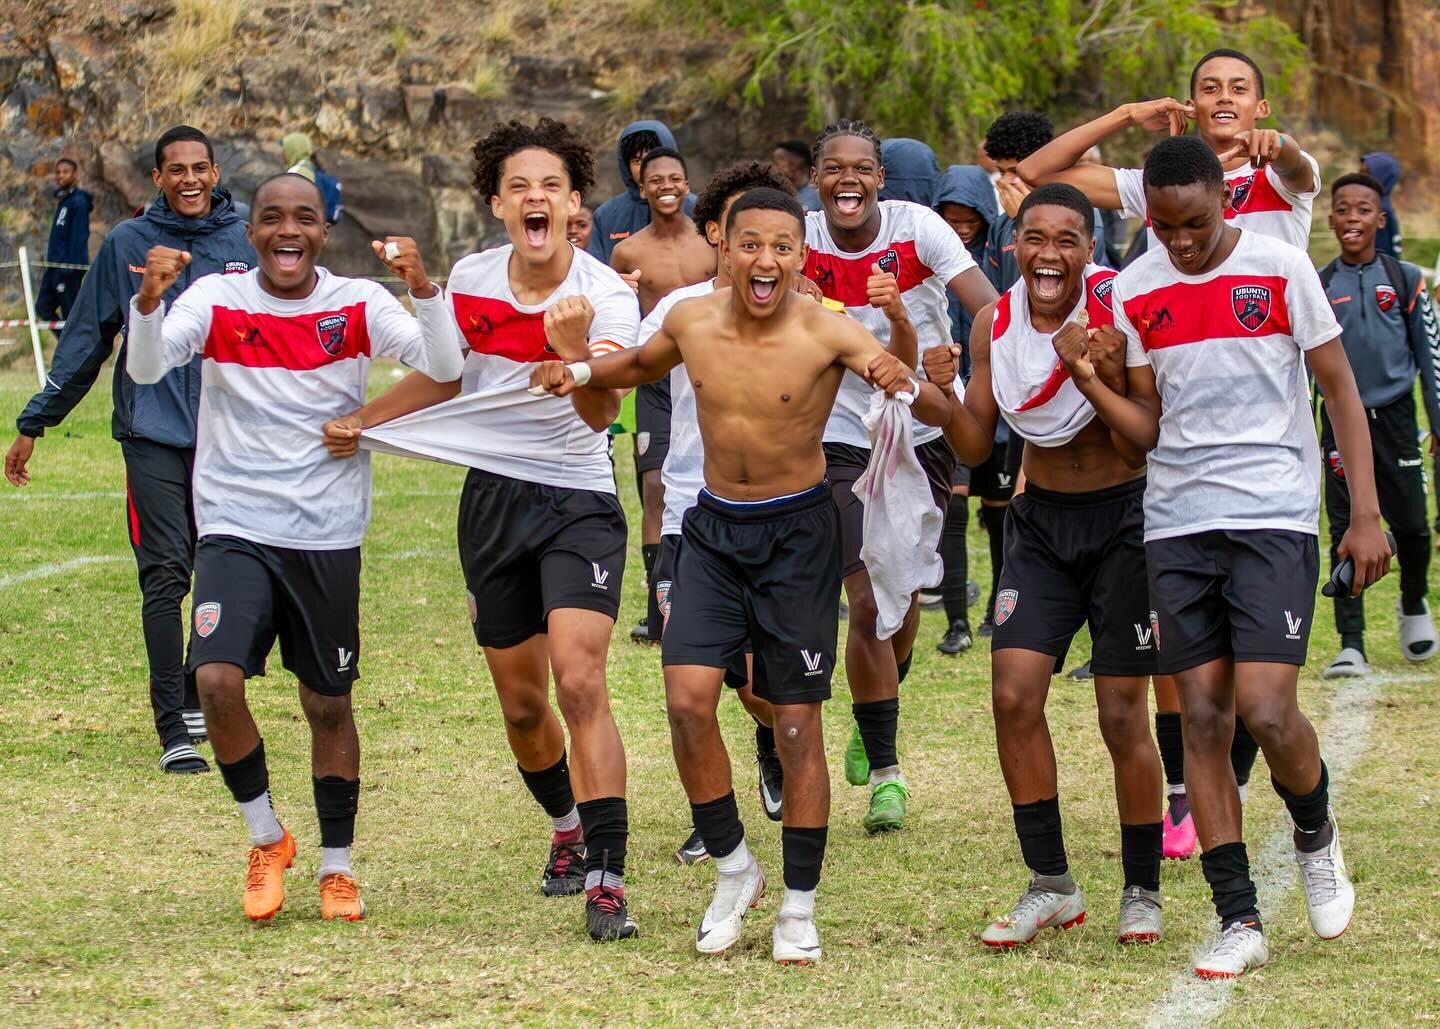 Over the Easter long weekend our U14 - U19s were busy competing in local tournaments across the city with varying degrees of success. 

Our U16s brought home (and retained) the U16 FTIFA Cup, overcoming Hout Bay United FC on penalties in the final. C